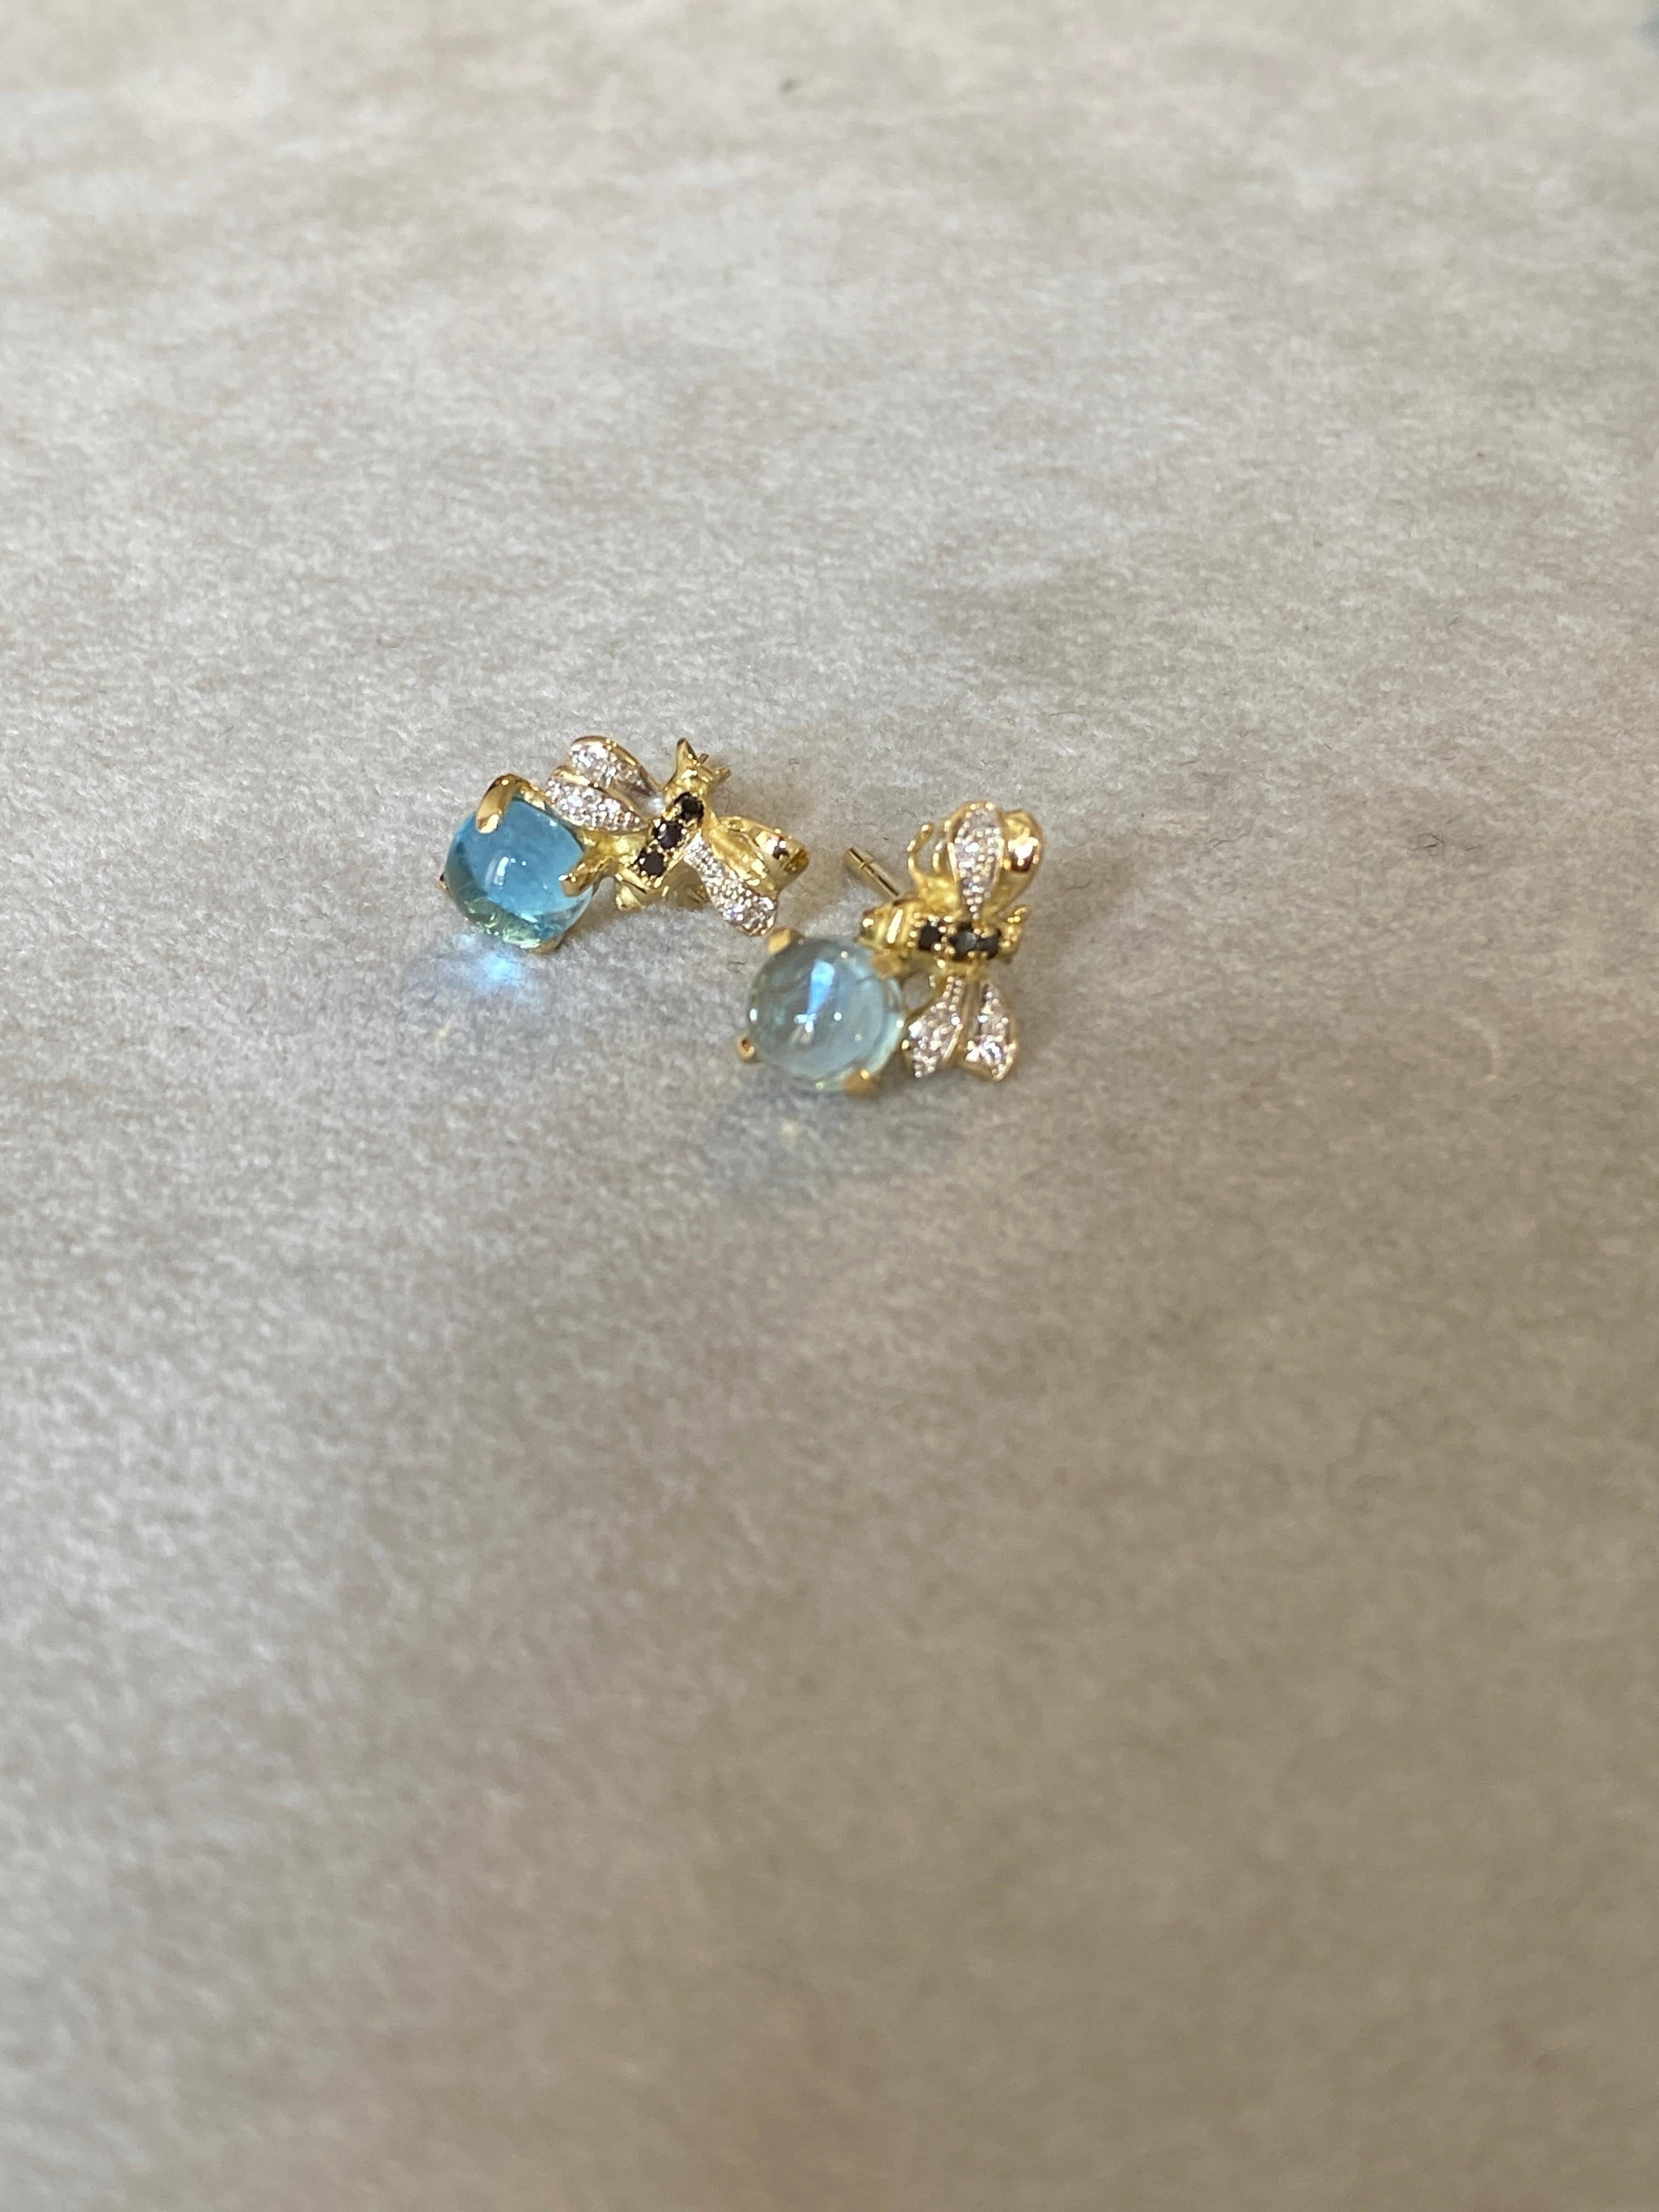 Rossella Ugolini 2.16 Kt Aquamarine 18K Gold Diamonds Bees Stud Earring In New Condition For Sale In Rome, IT